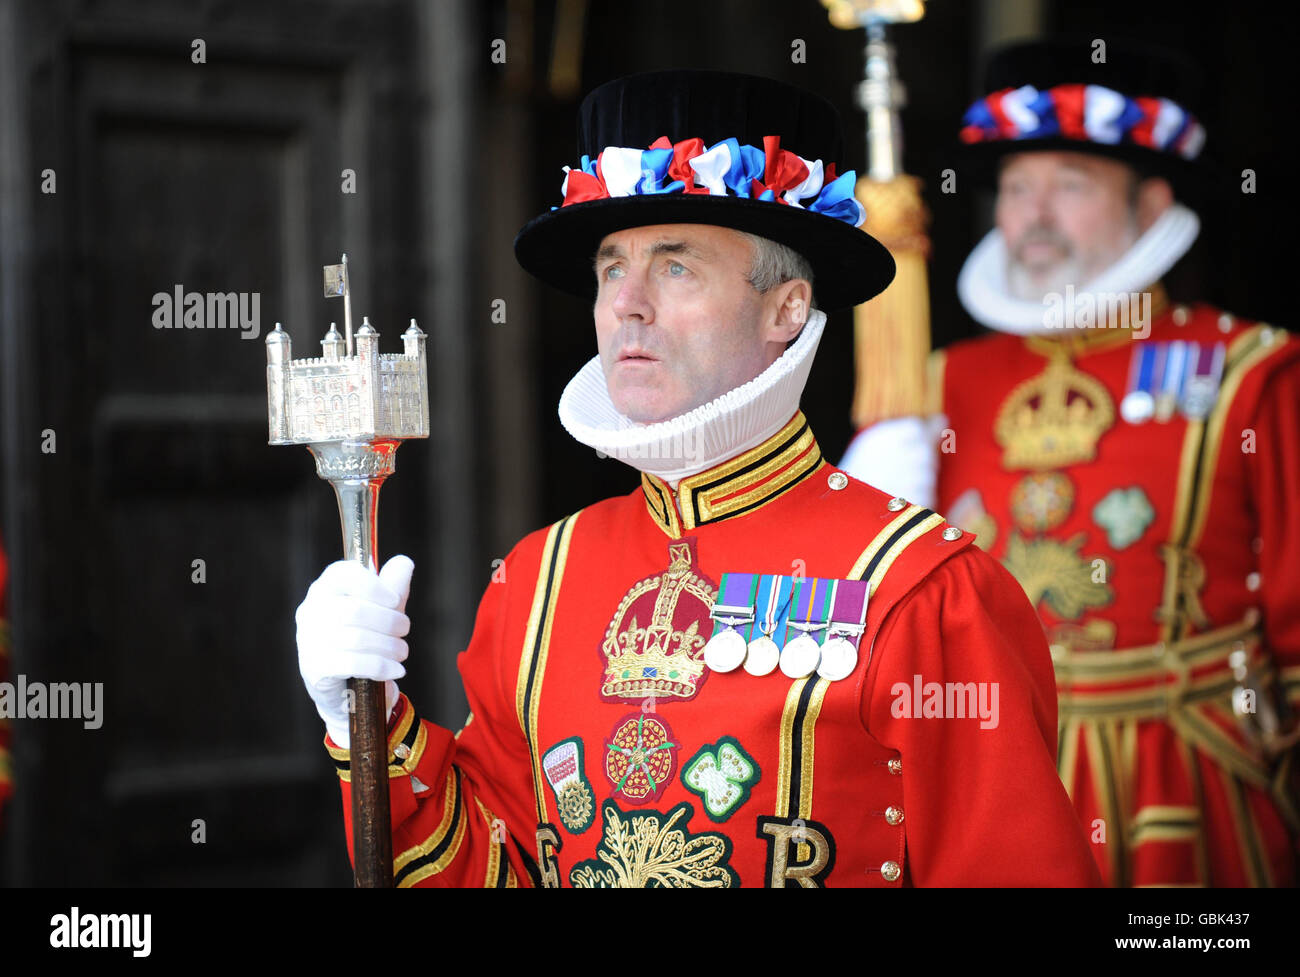 Yeoman Warders stand at the entrance to Westminster Abbey awaiting the arrival of The Queen for a service to commemorate the 500th anniversary of the Founder of the Queen's Body Guard of the Yeoman of the Guard. Stock Photo